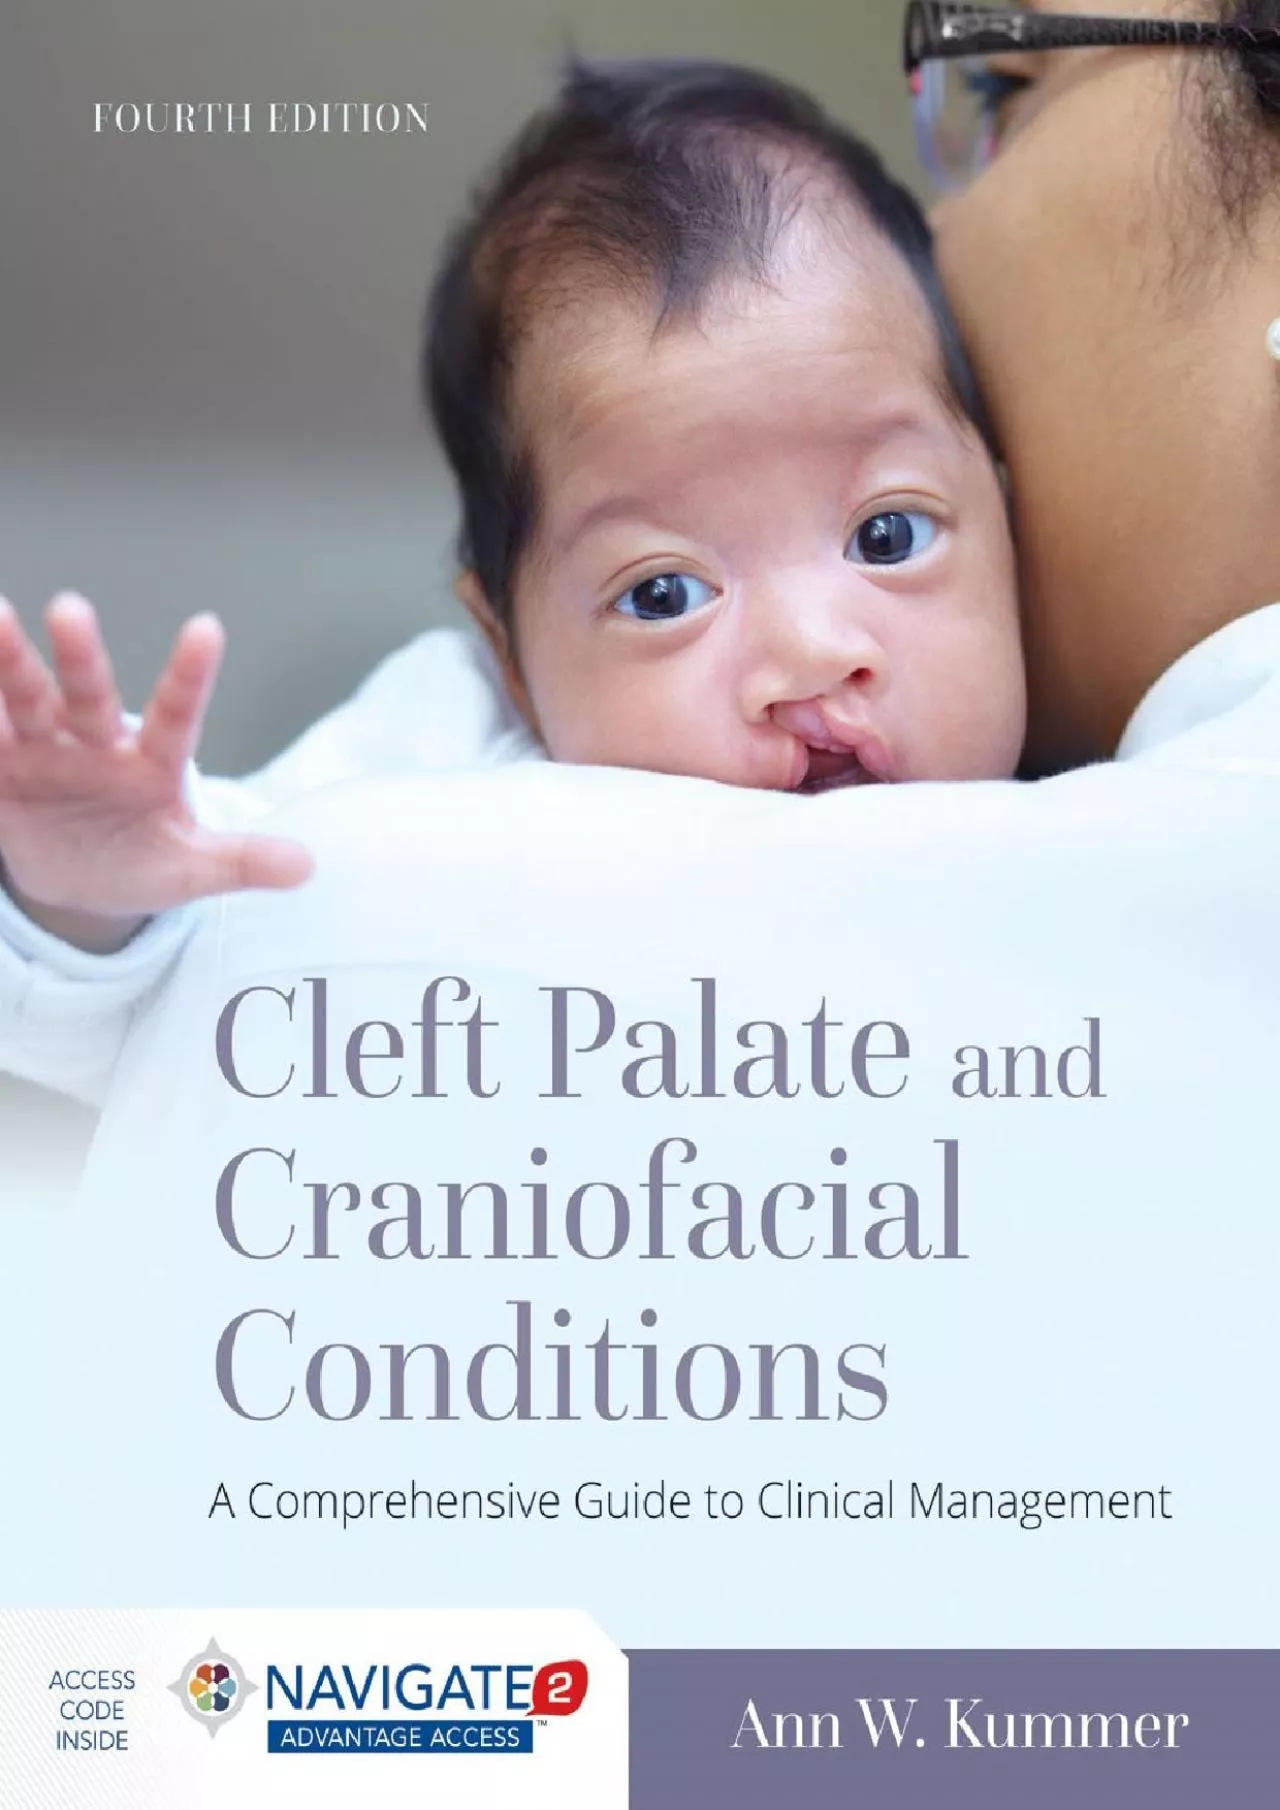 (READ)-Cleft Palate and Craniofacial Conditions: A Comprehensive Guide to Clinical Management: